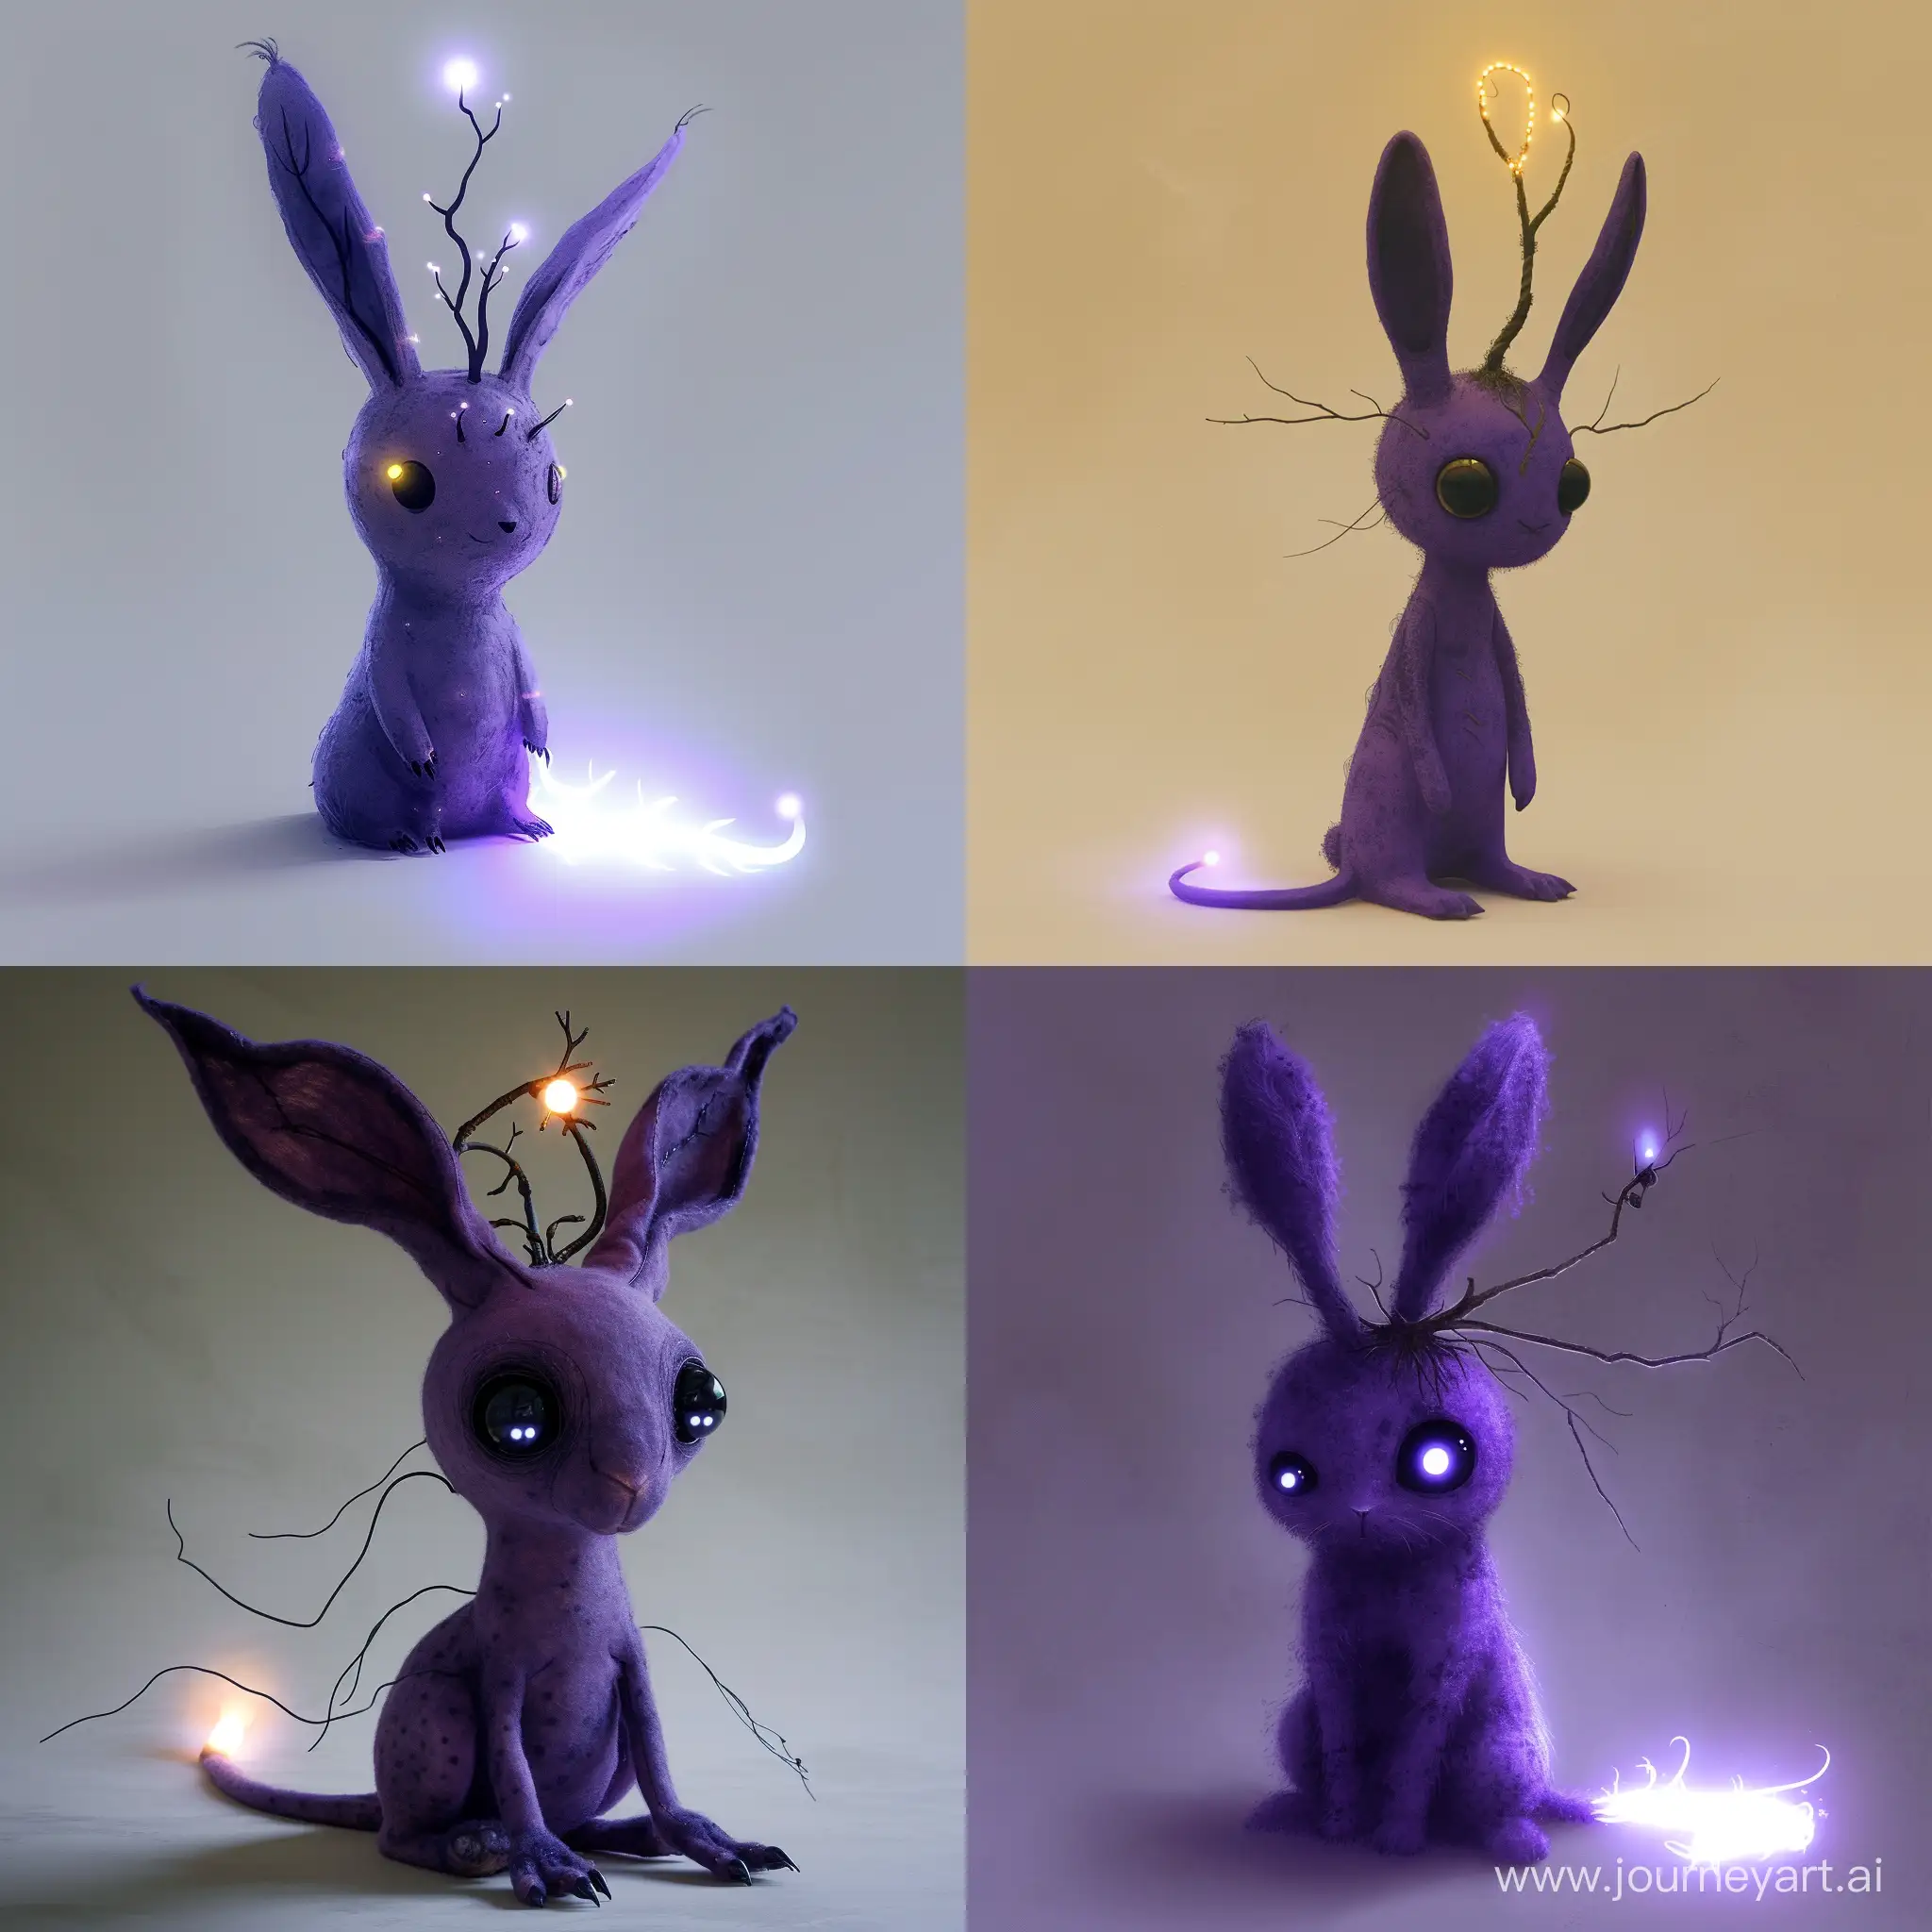 Enchanting-Purple-Rabbit-with-Six-Ears-and-Glowing-Twig-Crown